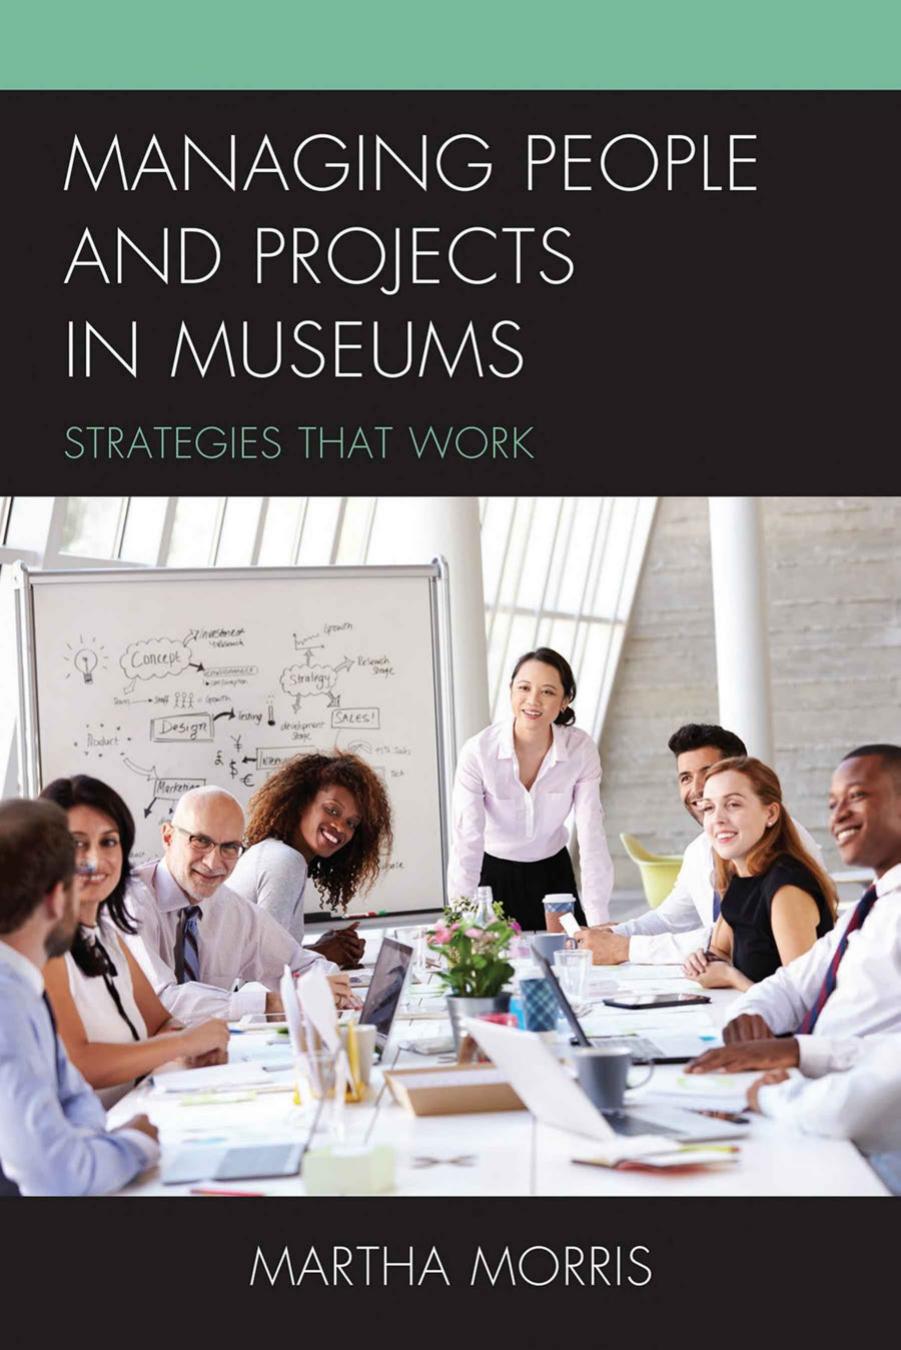 Managing People and Projects in Museums: Strategies that Work by Martha Morris